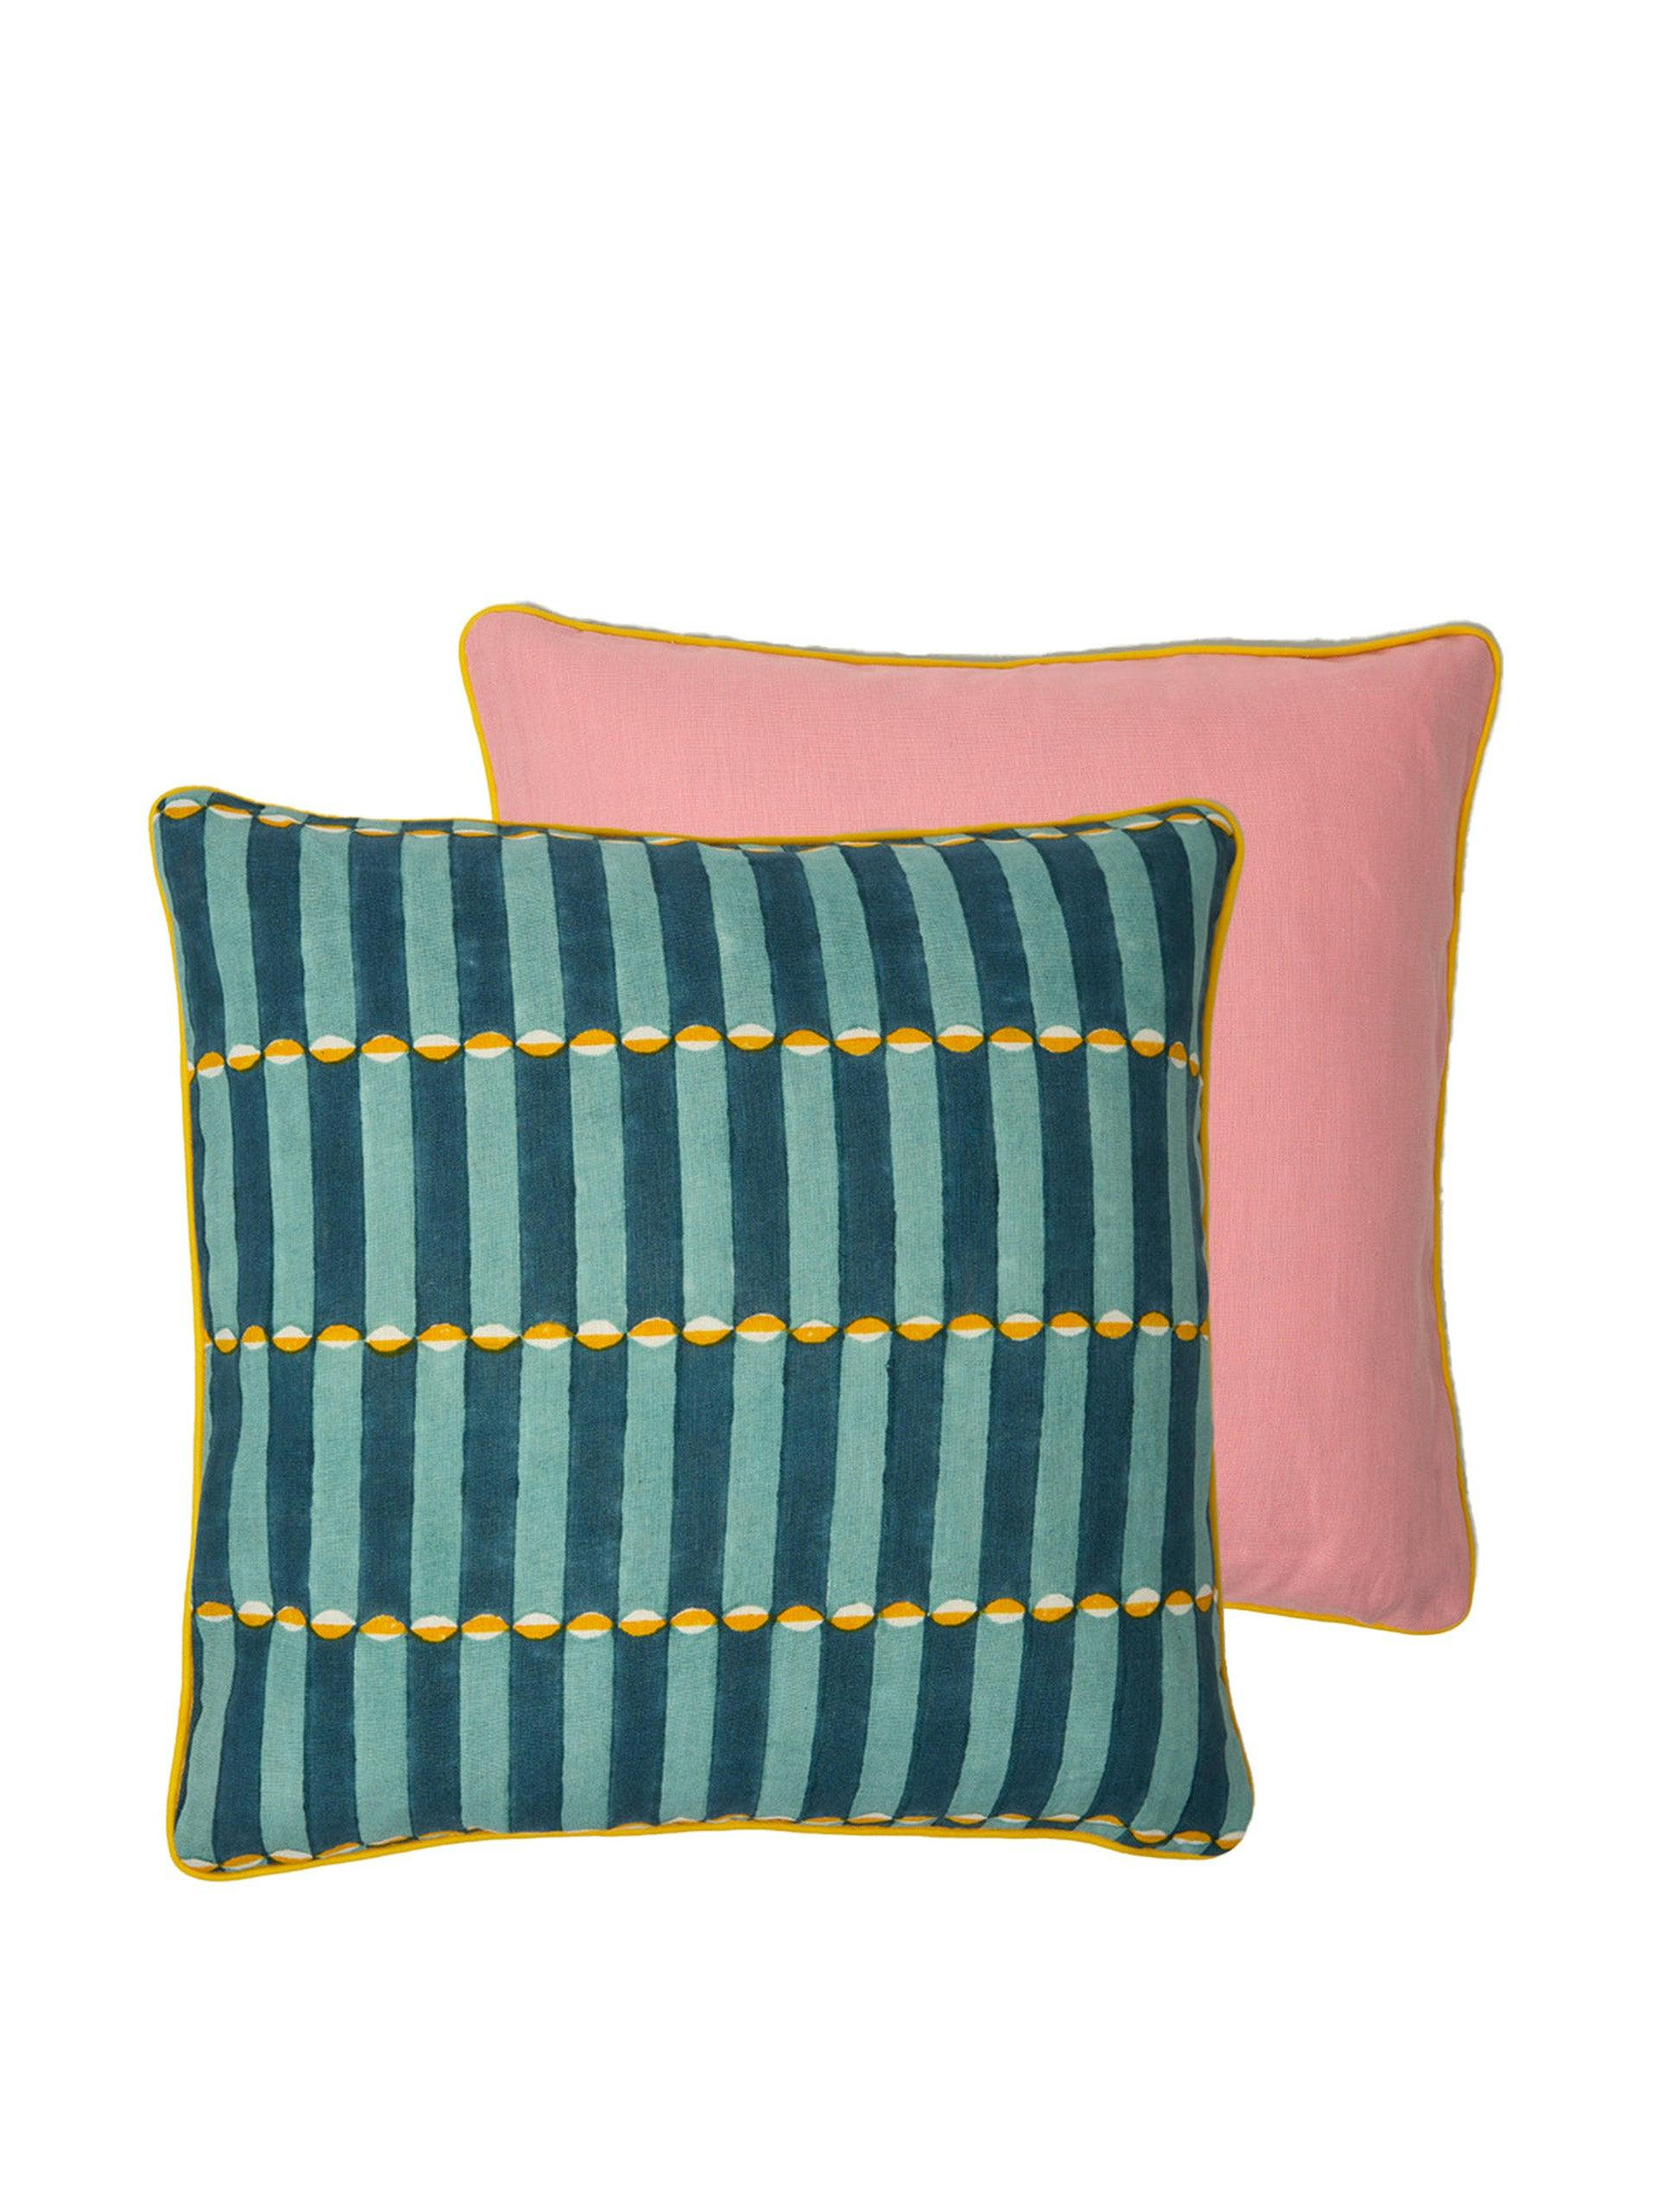 Contrasting cushion in Luna blue and Isabella pink with yellow piping